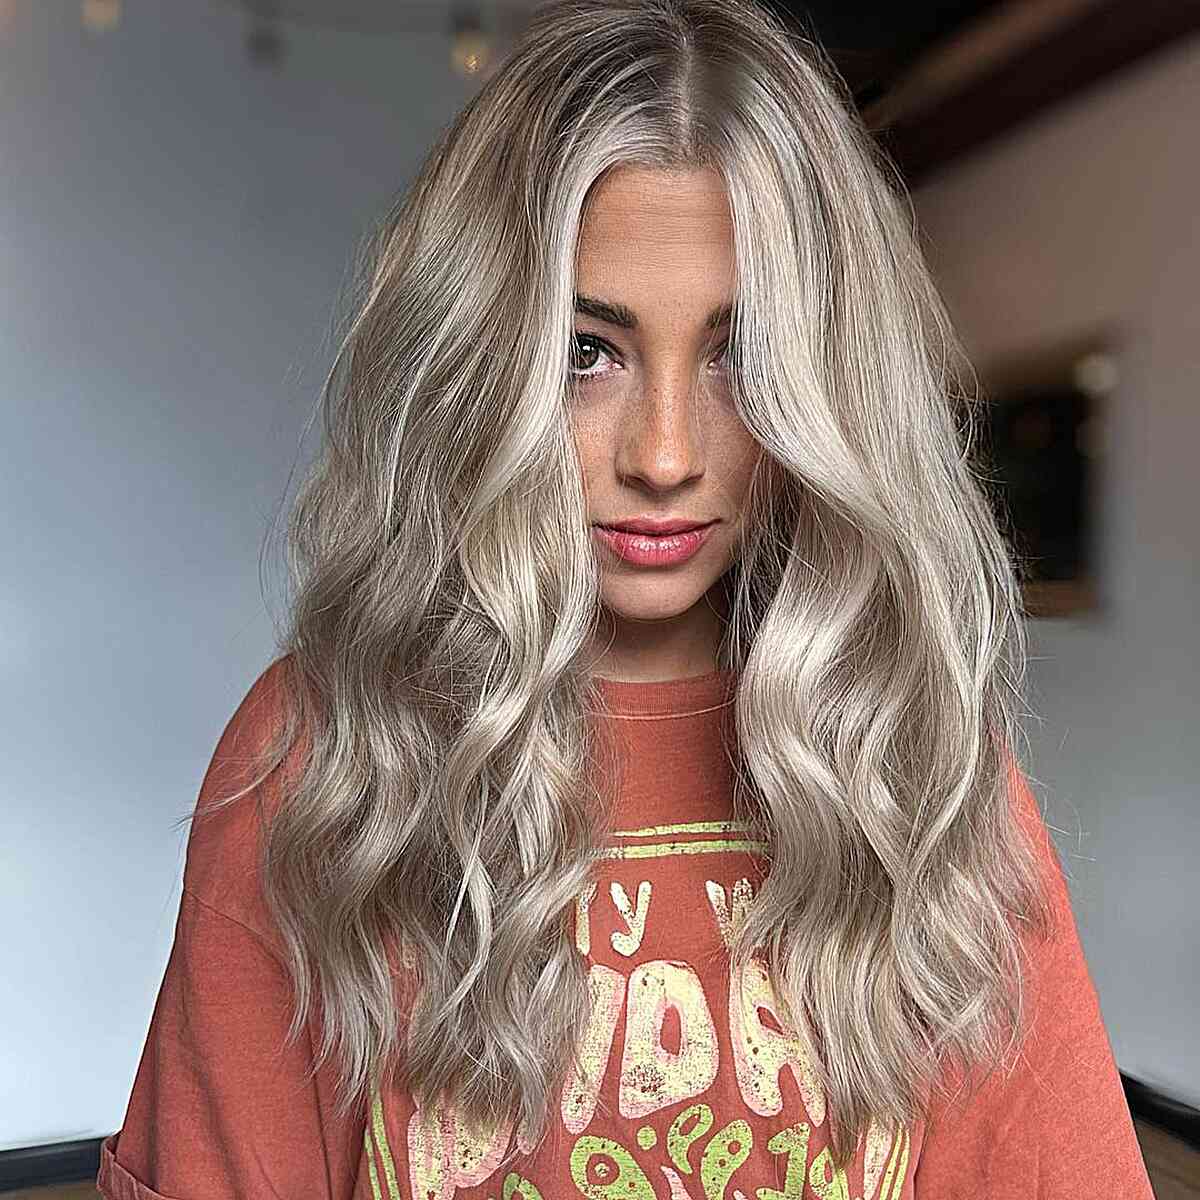 Effortless Long Textured Blonde Hair for girls with lived-in texture in their hair